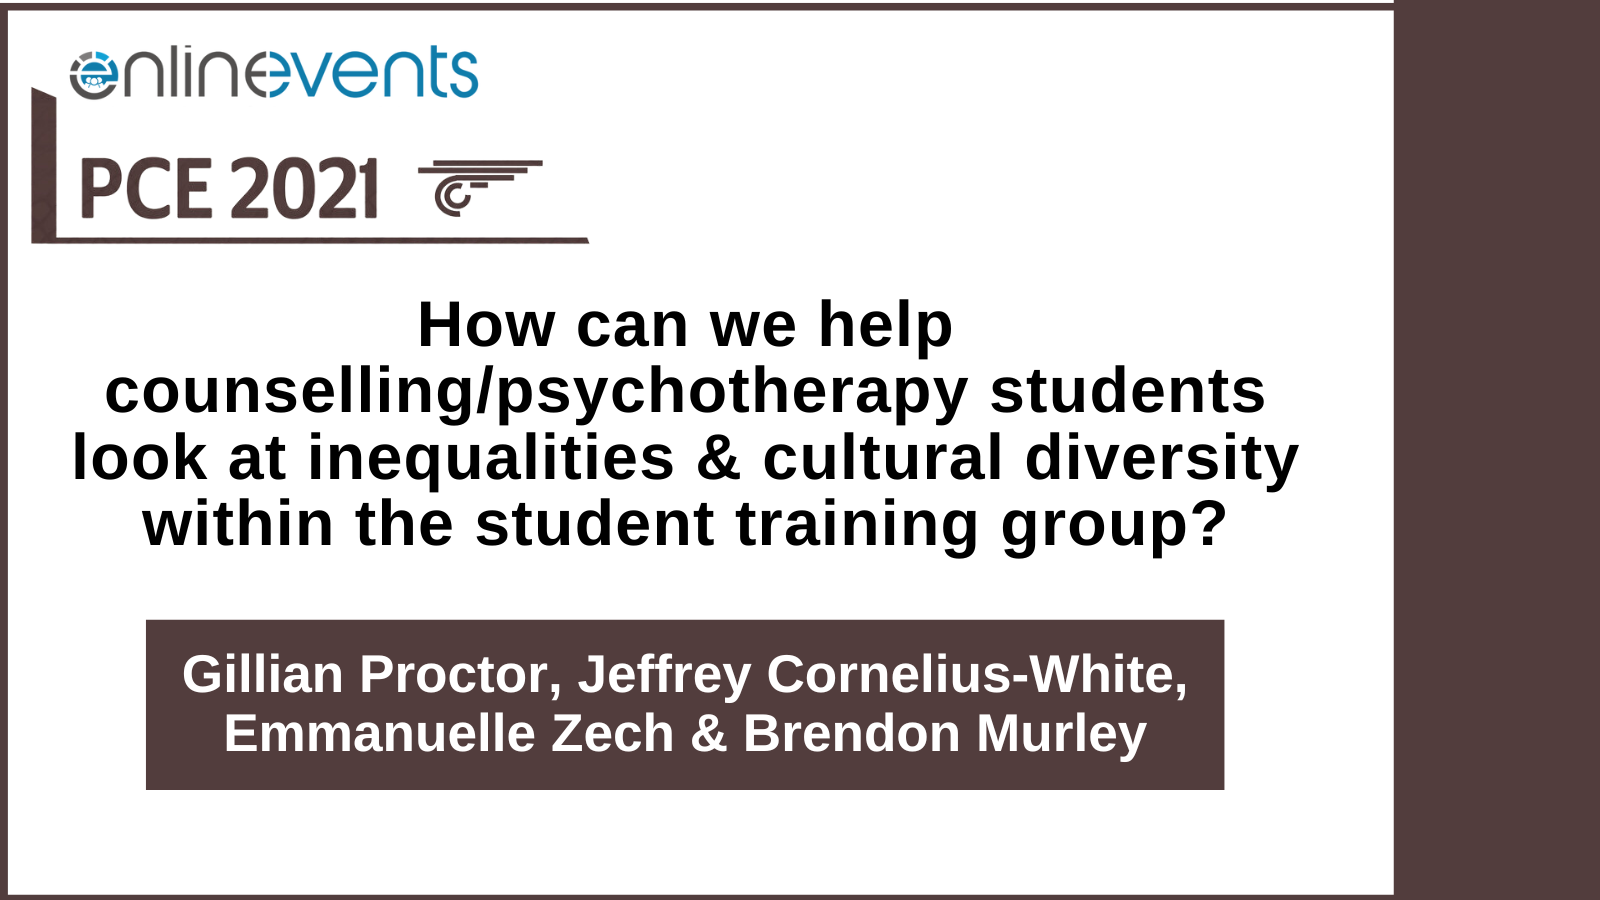 How can we help counsellingpsychotherapy students look at inequalities & cultural diversity within the student training group Gillian Proctor, Jeffrey Cornelius-White, Emmanuelle Zech & Brendon Mu